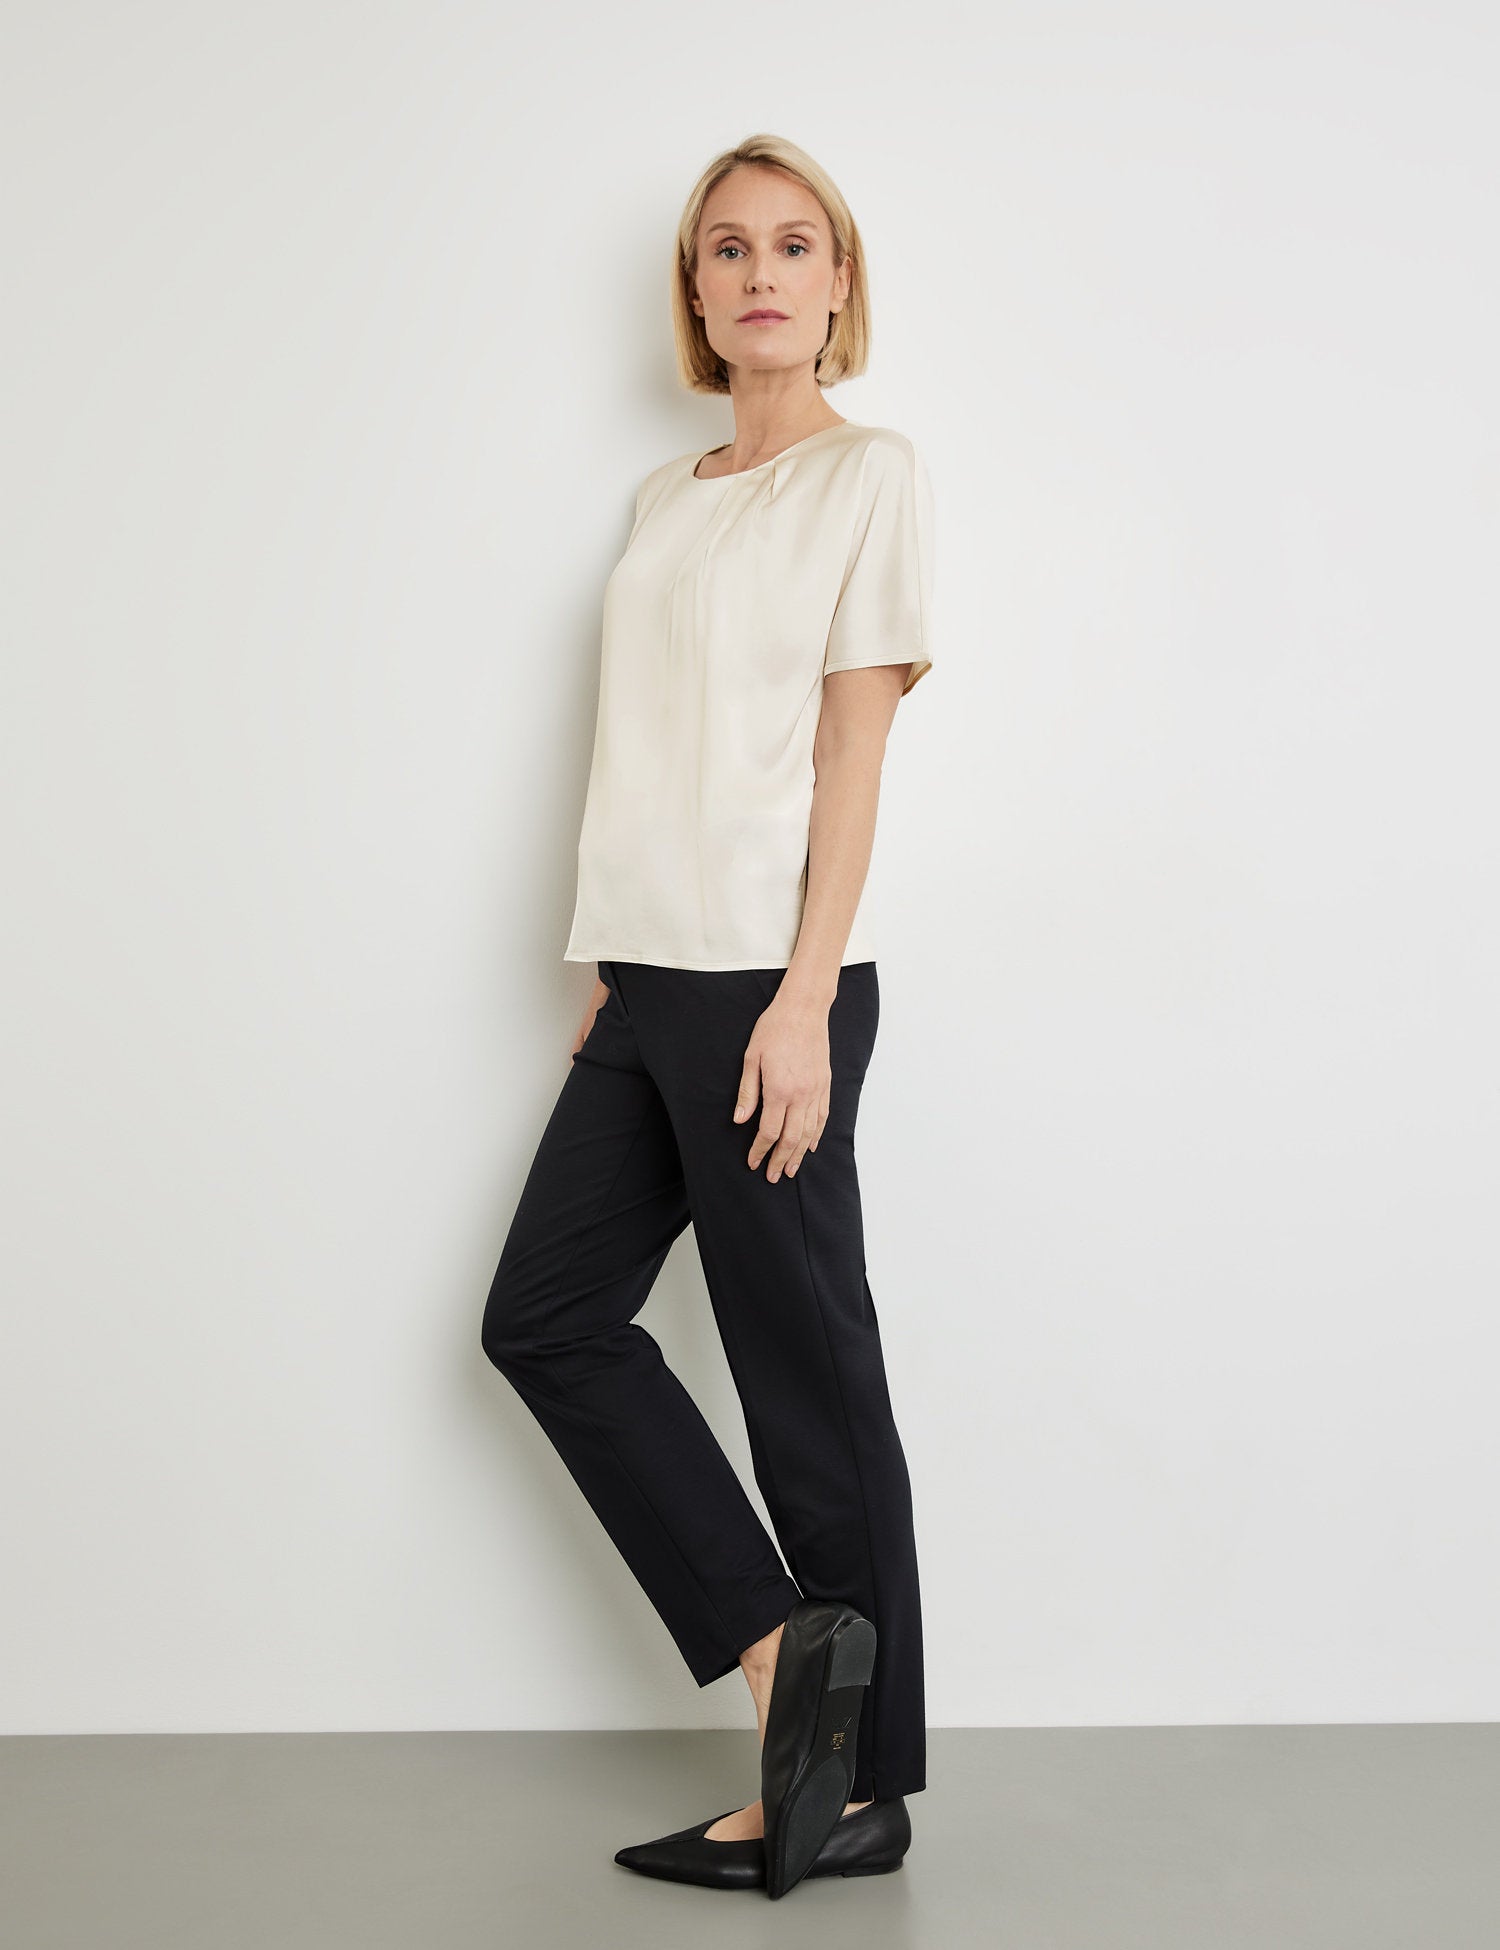 Flowing Blouse Top With Fabric Panelling_977047-35033_90118_05